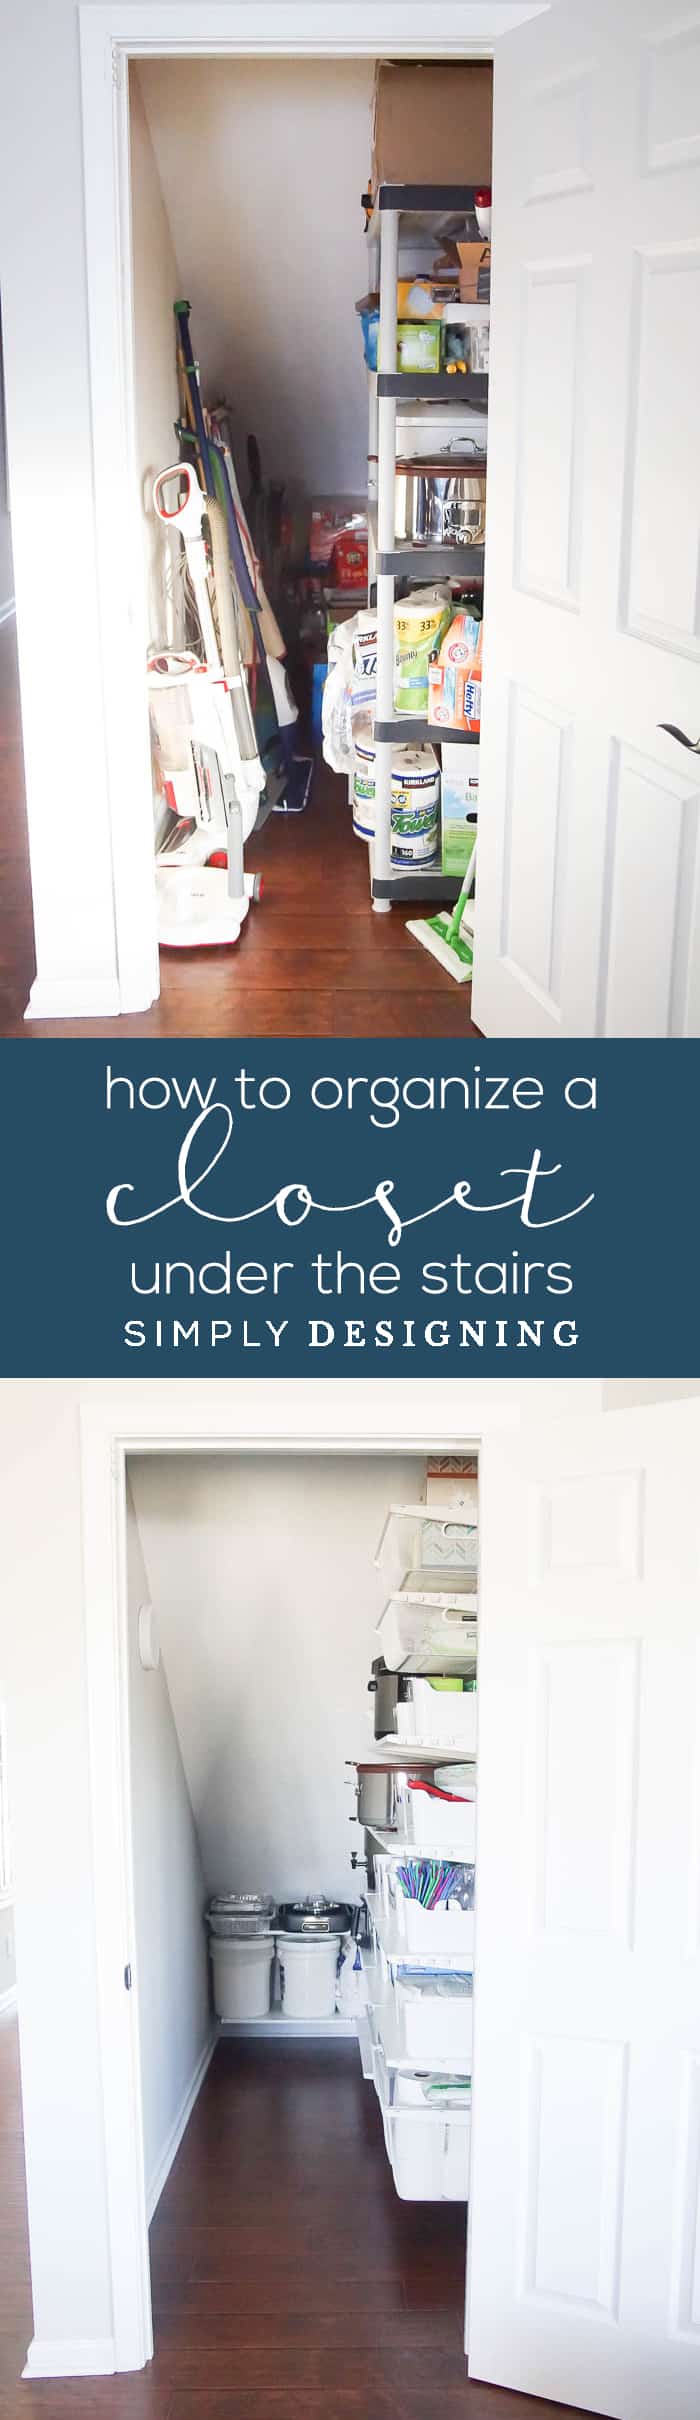 How to Organize a Closet Under the Stairs - before and after